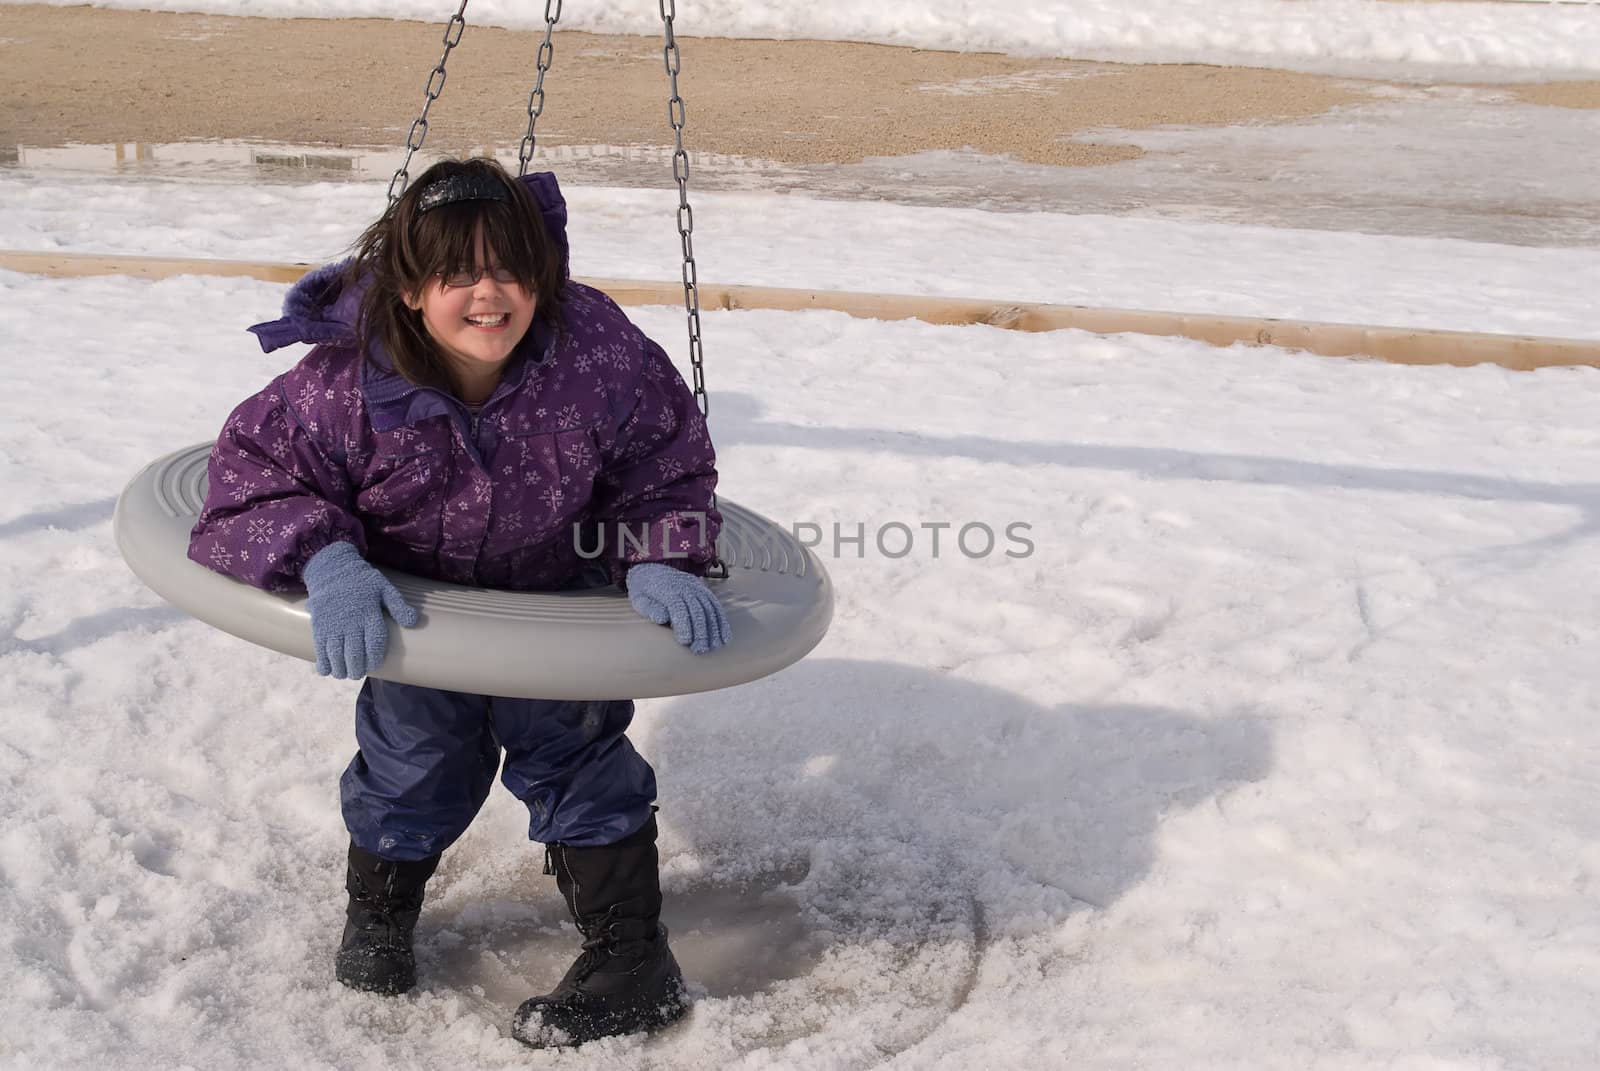 A young girl on a plastic tire swing in a school playground